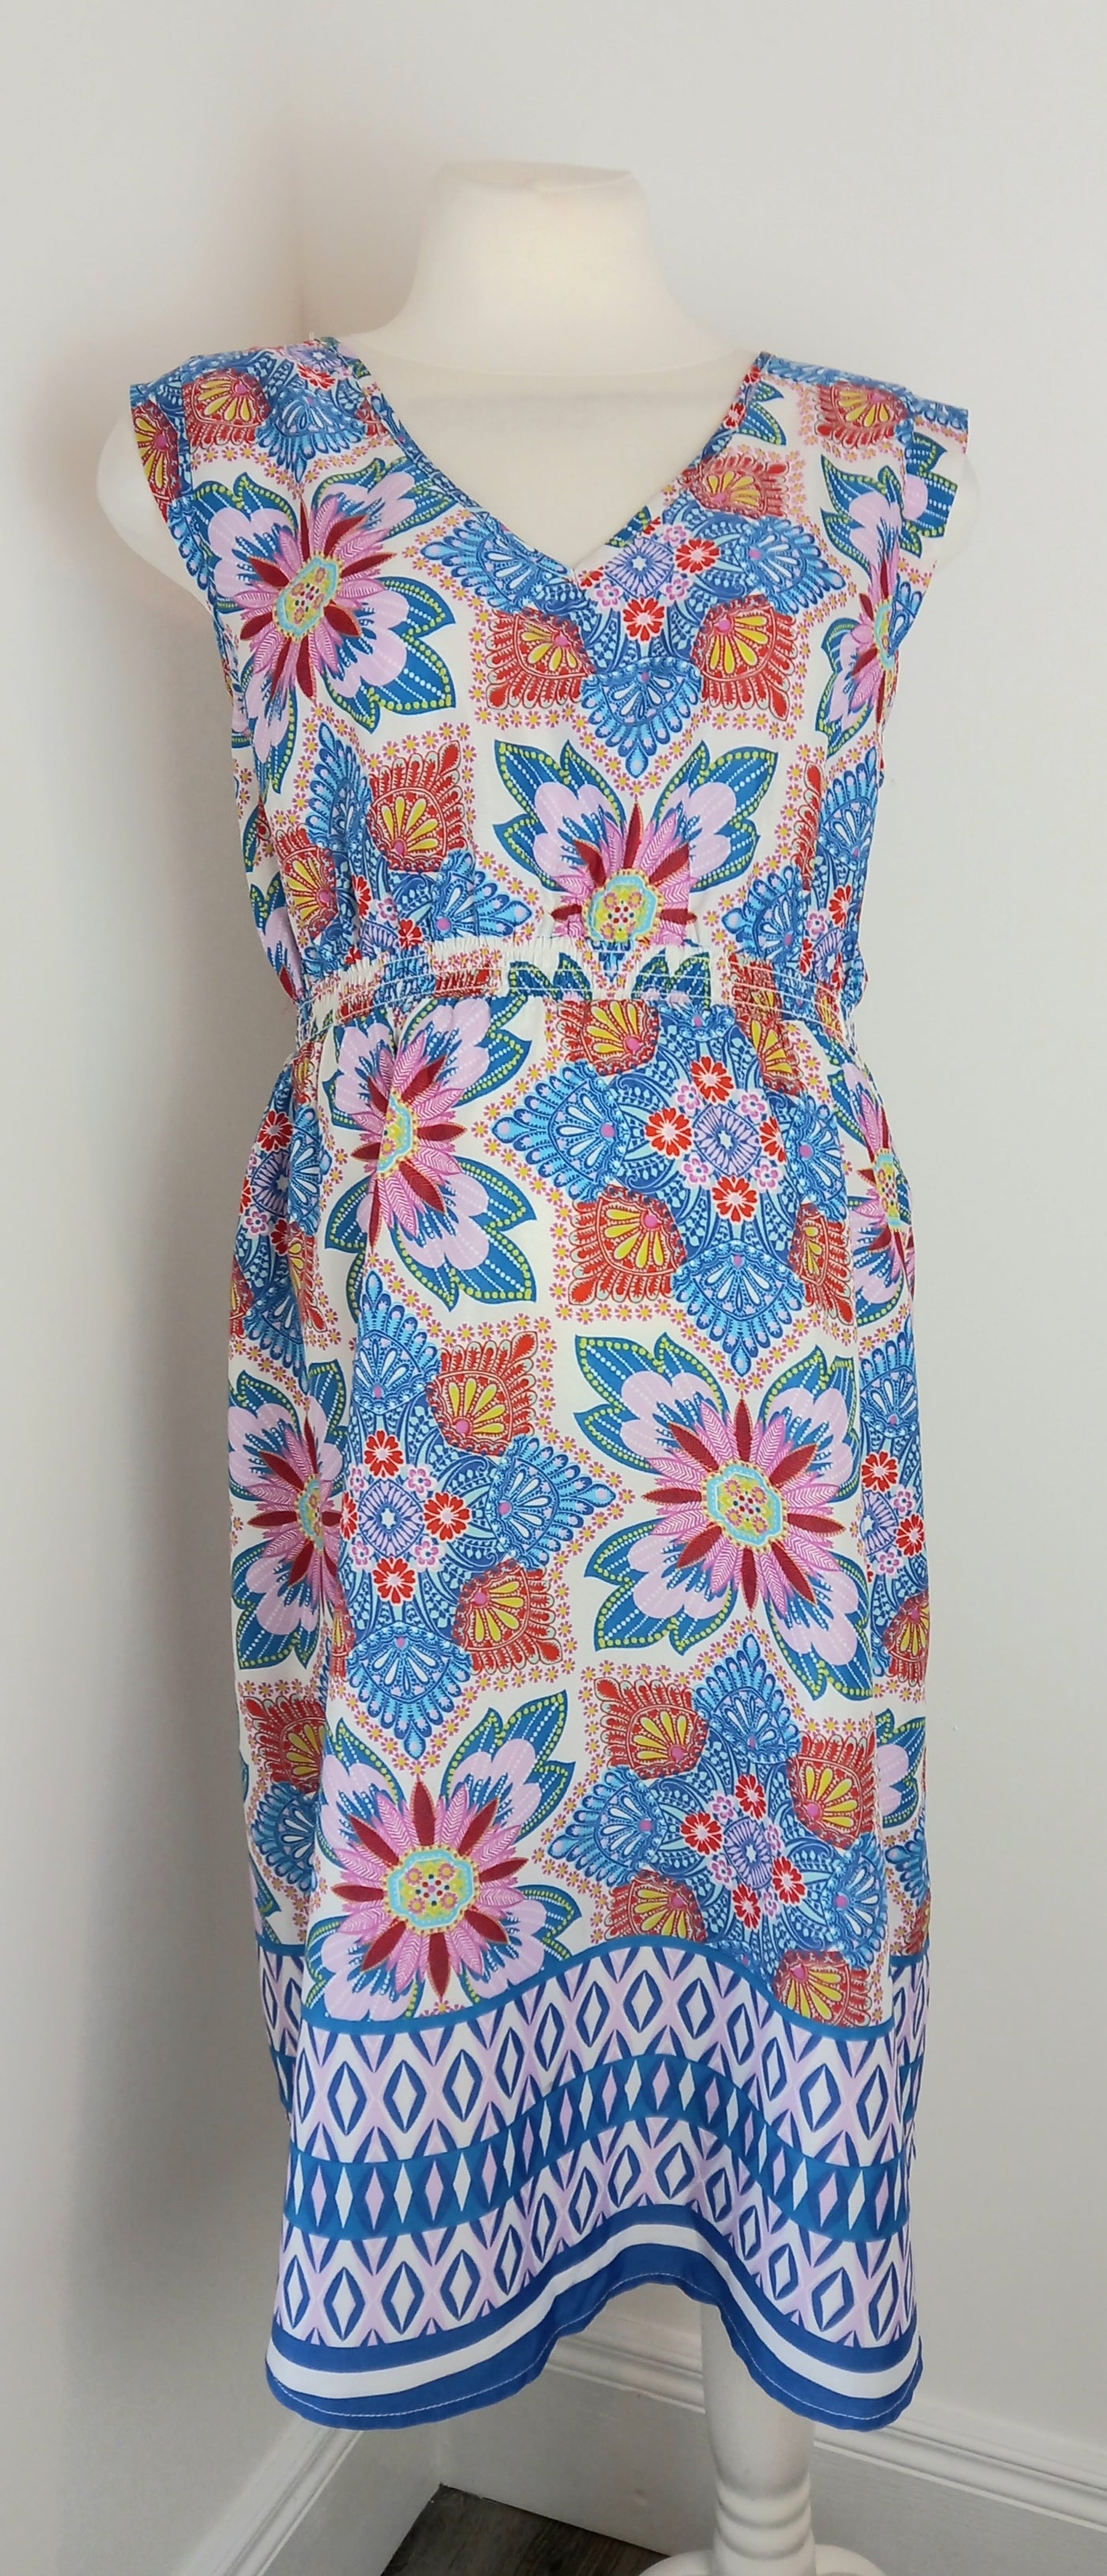 New Look Maternity White, Blue, Orange & Pink Floral Summer Dress - Size 14